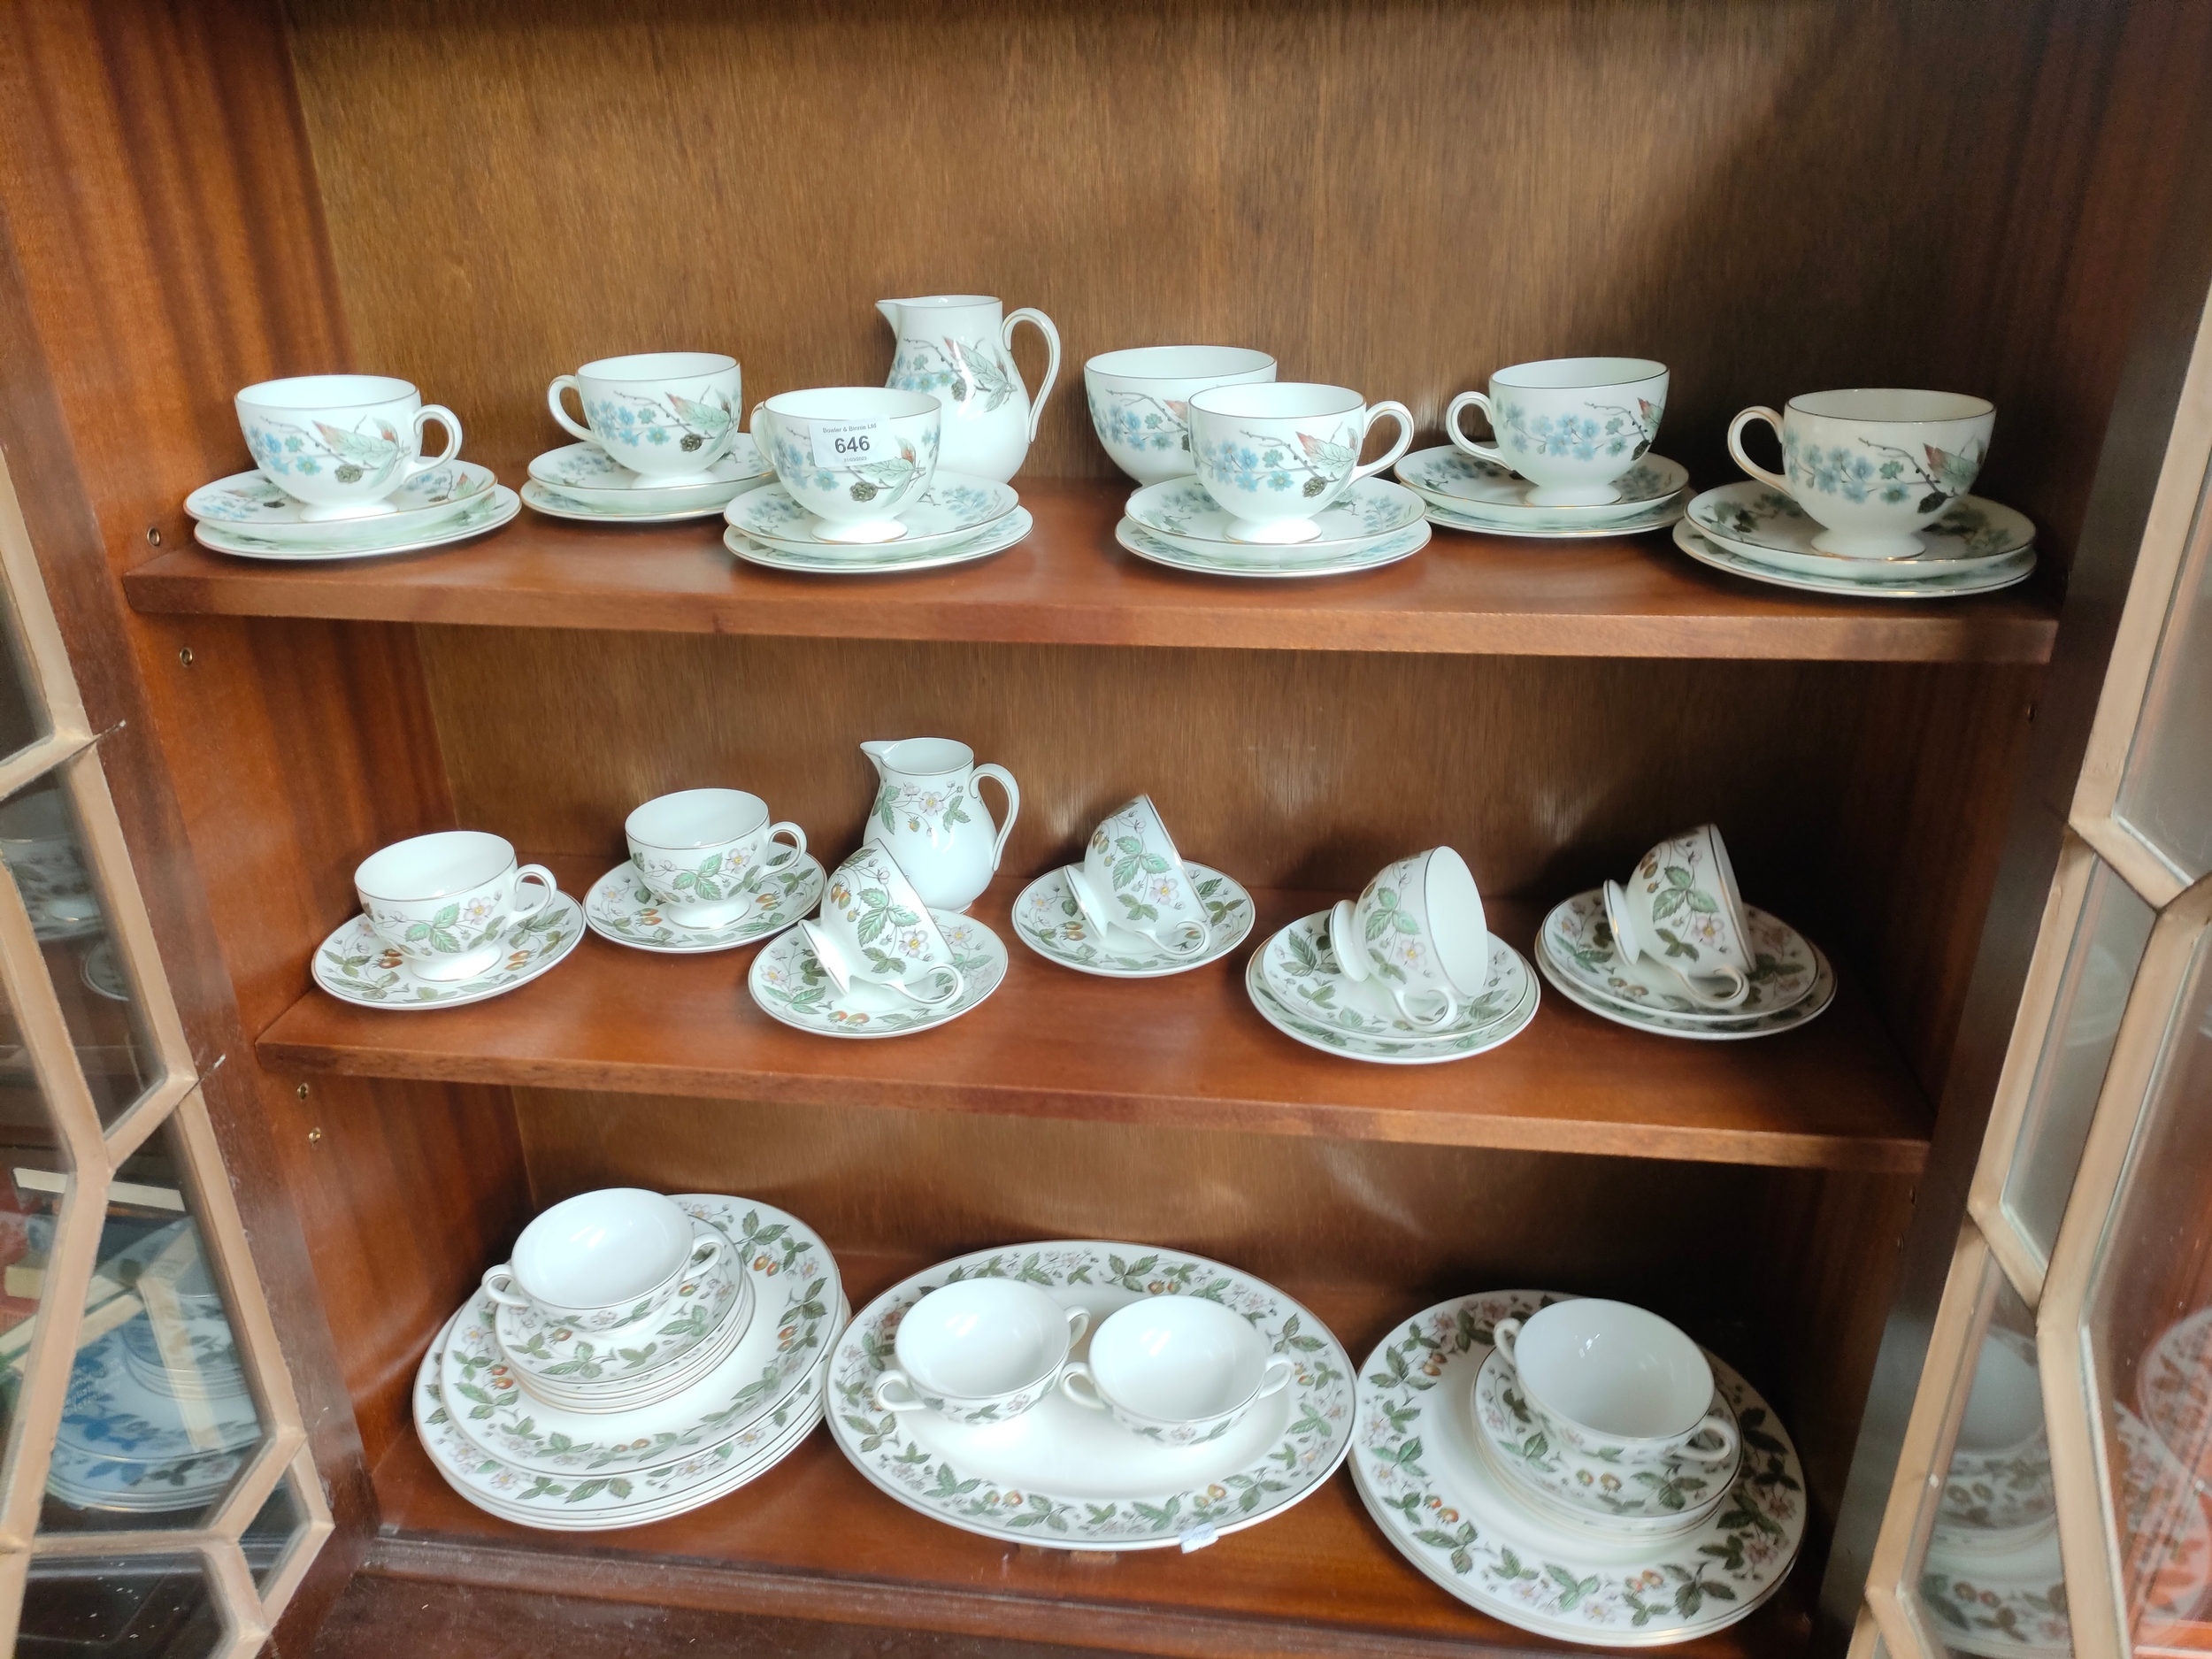 A Large wedgewood strawberry tea /dinner service